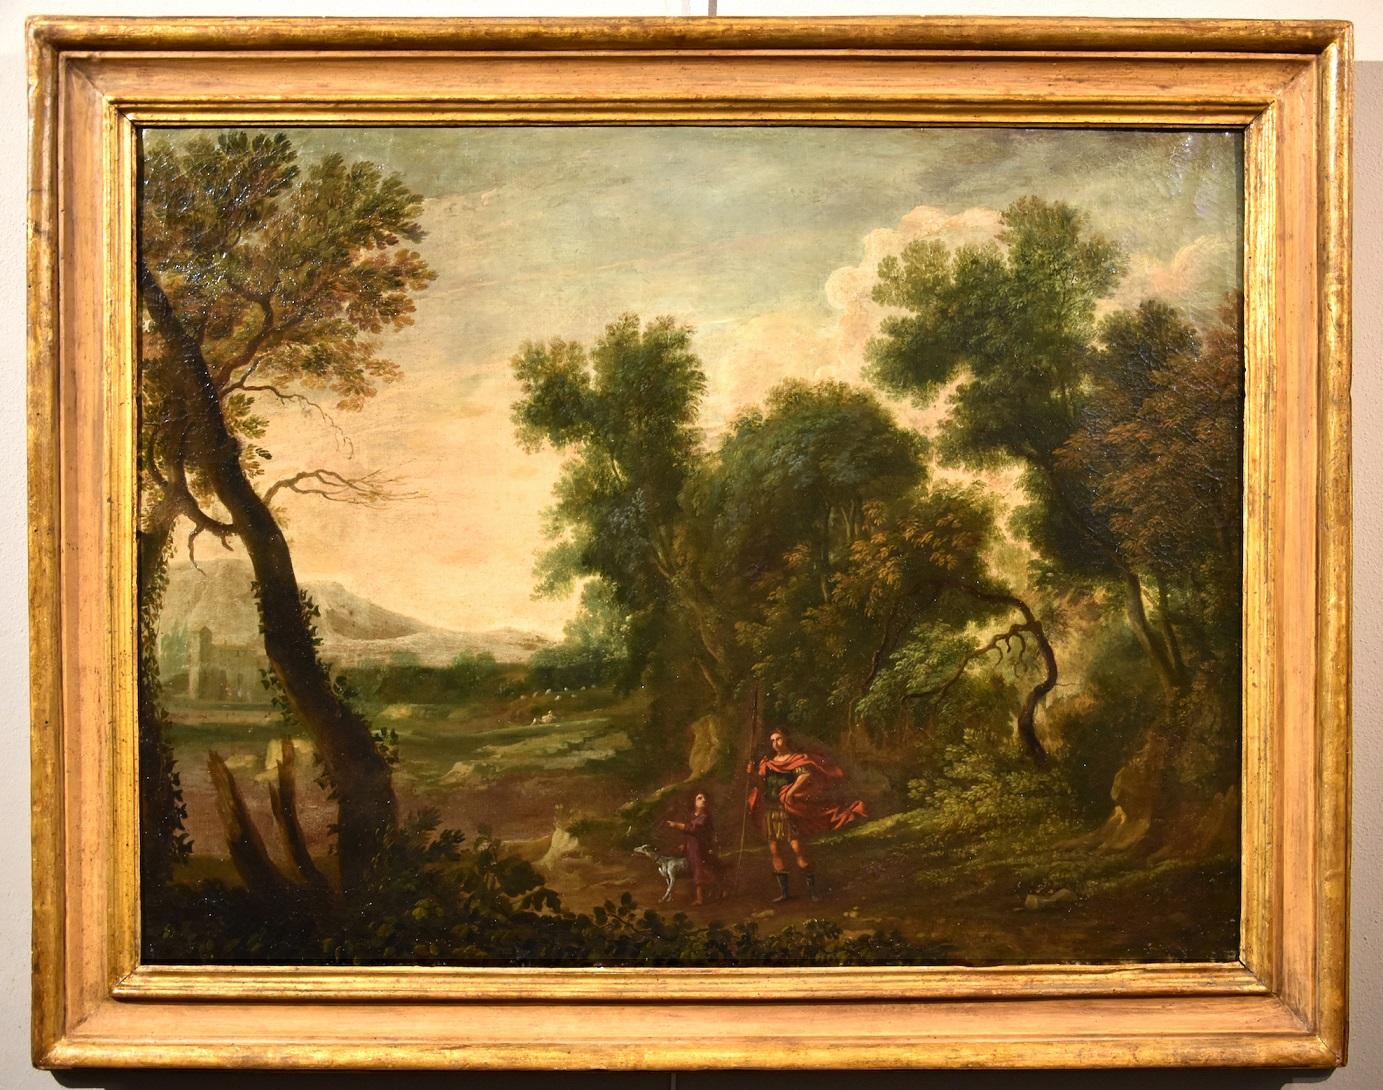 Dughet Woodland Landscape Old master Paint Oil on canvas 17th Century Italy Art - Painting by Gaspard Dughet, called Gaspard Poussin (Rome 1615 - 1675)